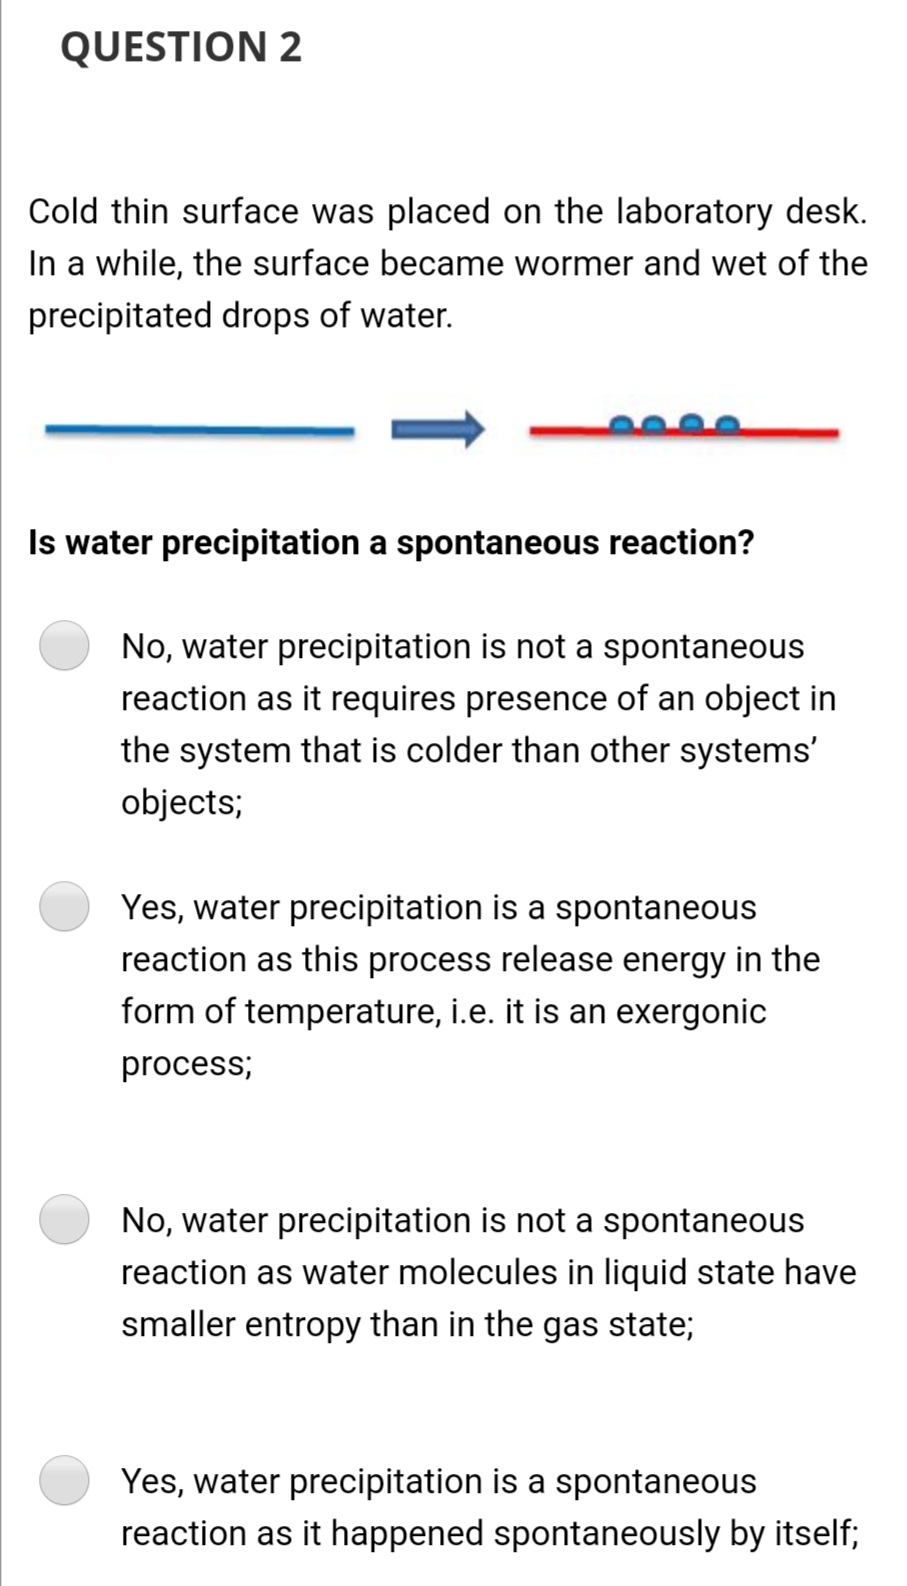 QUESTION 2
Cold thin surface was placed on the laboratory desk.
In a while, the surface became wormer and wet of the
precipitated drops of water.
Is water precipitation a spontaneous reaction?
No, water precipitation is not a spontaneous
reaction as it requires presence of an object in
the system that is colder than other systems'
objects;
Yes, water precipitation is a spontaneous
reaction as this process release energy in the
form of temperature, i.e. it is an exergonic
process;
No, water precipitation is not a spontaneous
reaction as water molecules in liquid state have
smaller entropy than in the gas state;
Yes, water precipitation is a spontaneous
reaction as it happened spontaneously by itself;